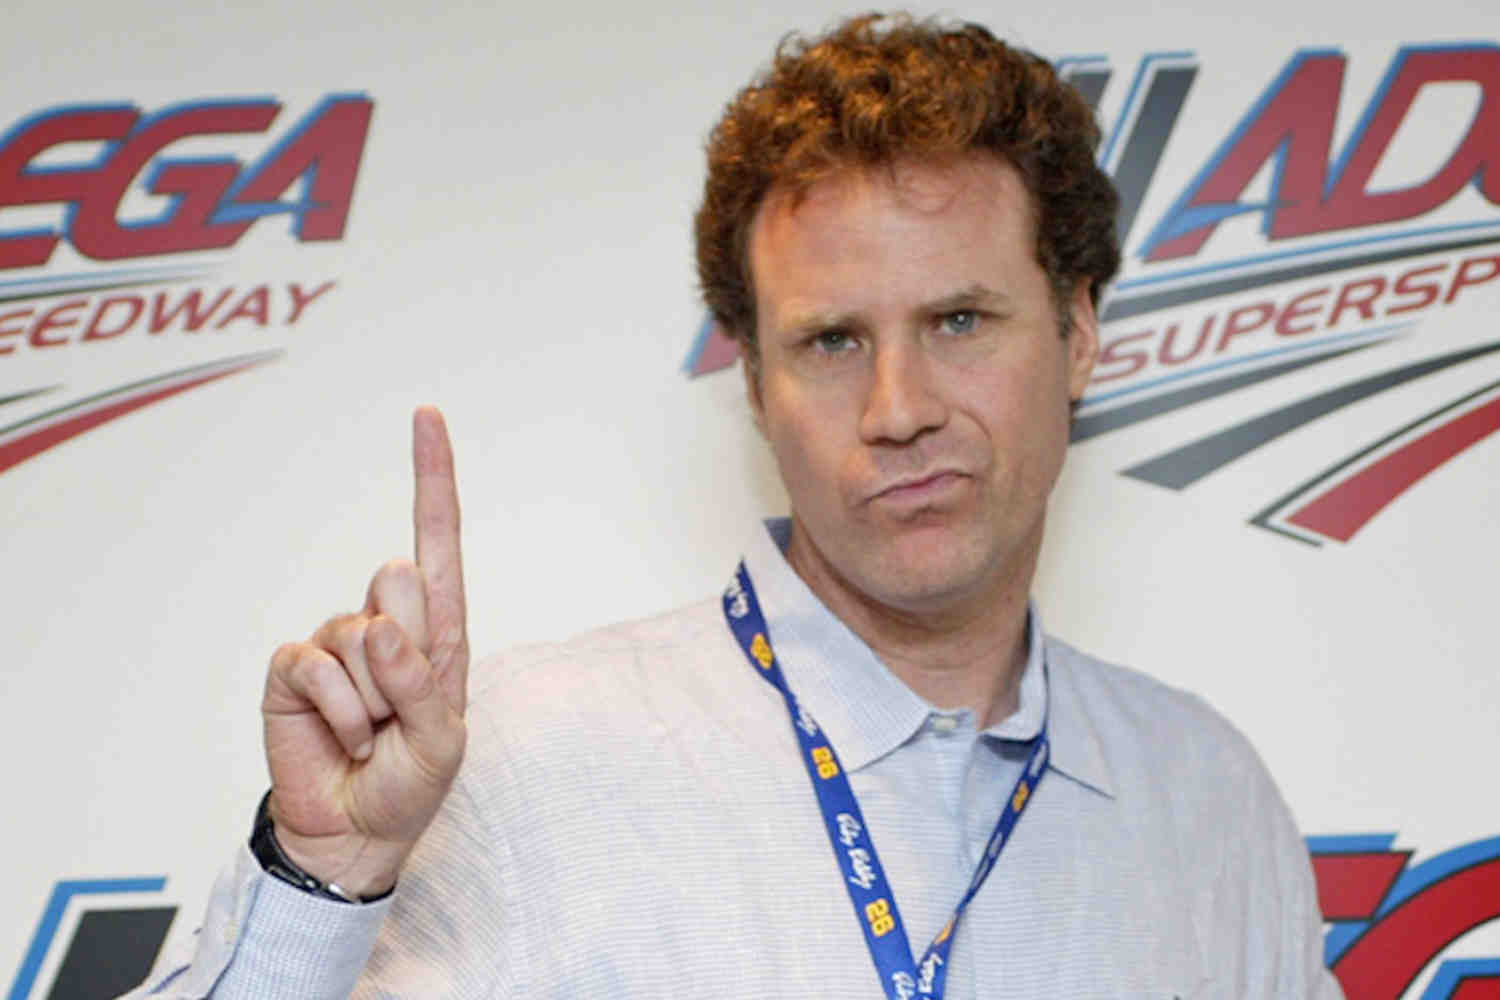 Step Brothers actor Will Ferrell at a movie premiere